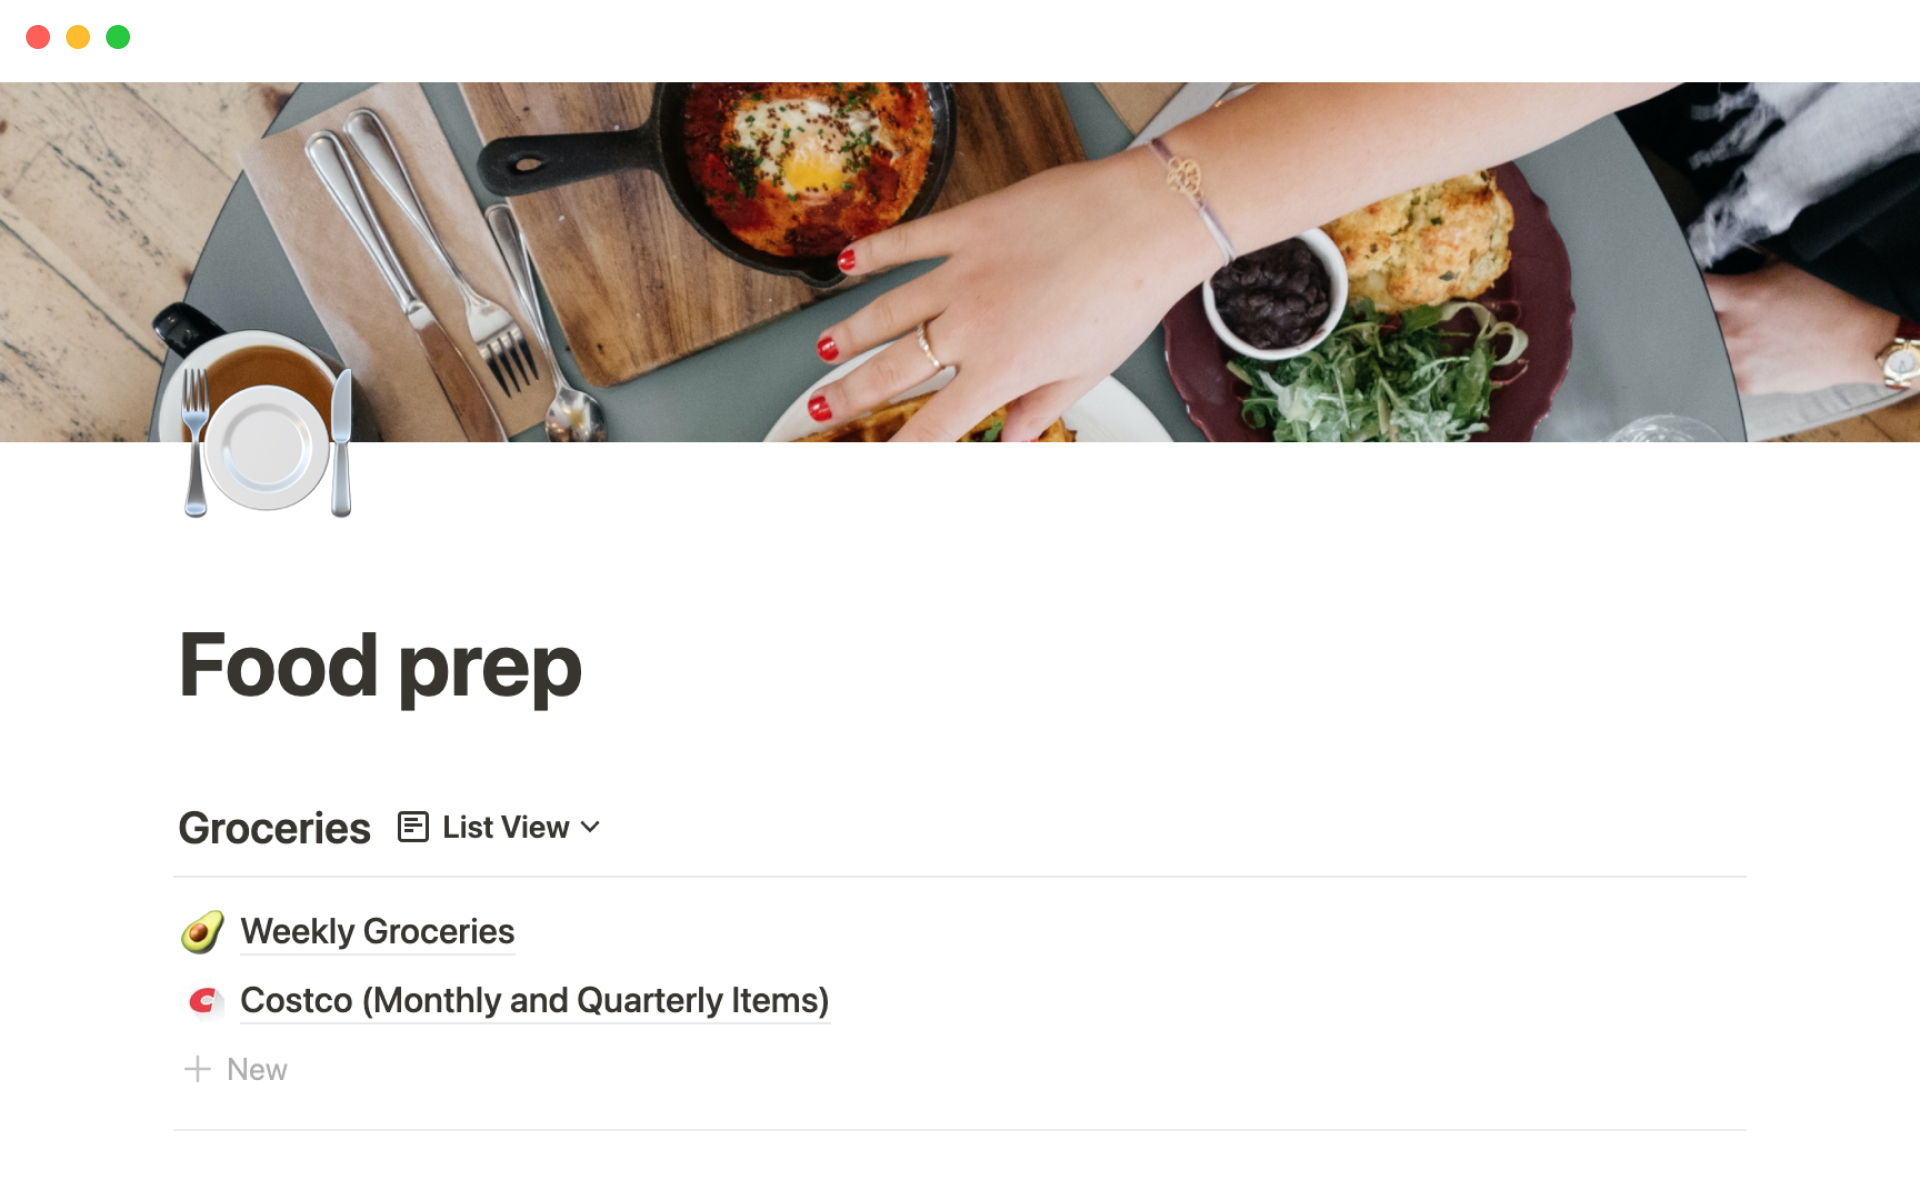 The desktop image for the Food prep template